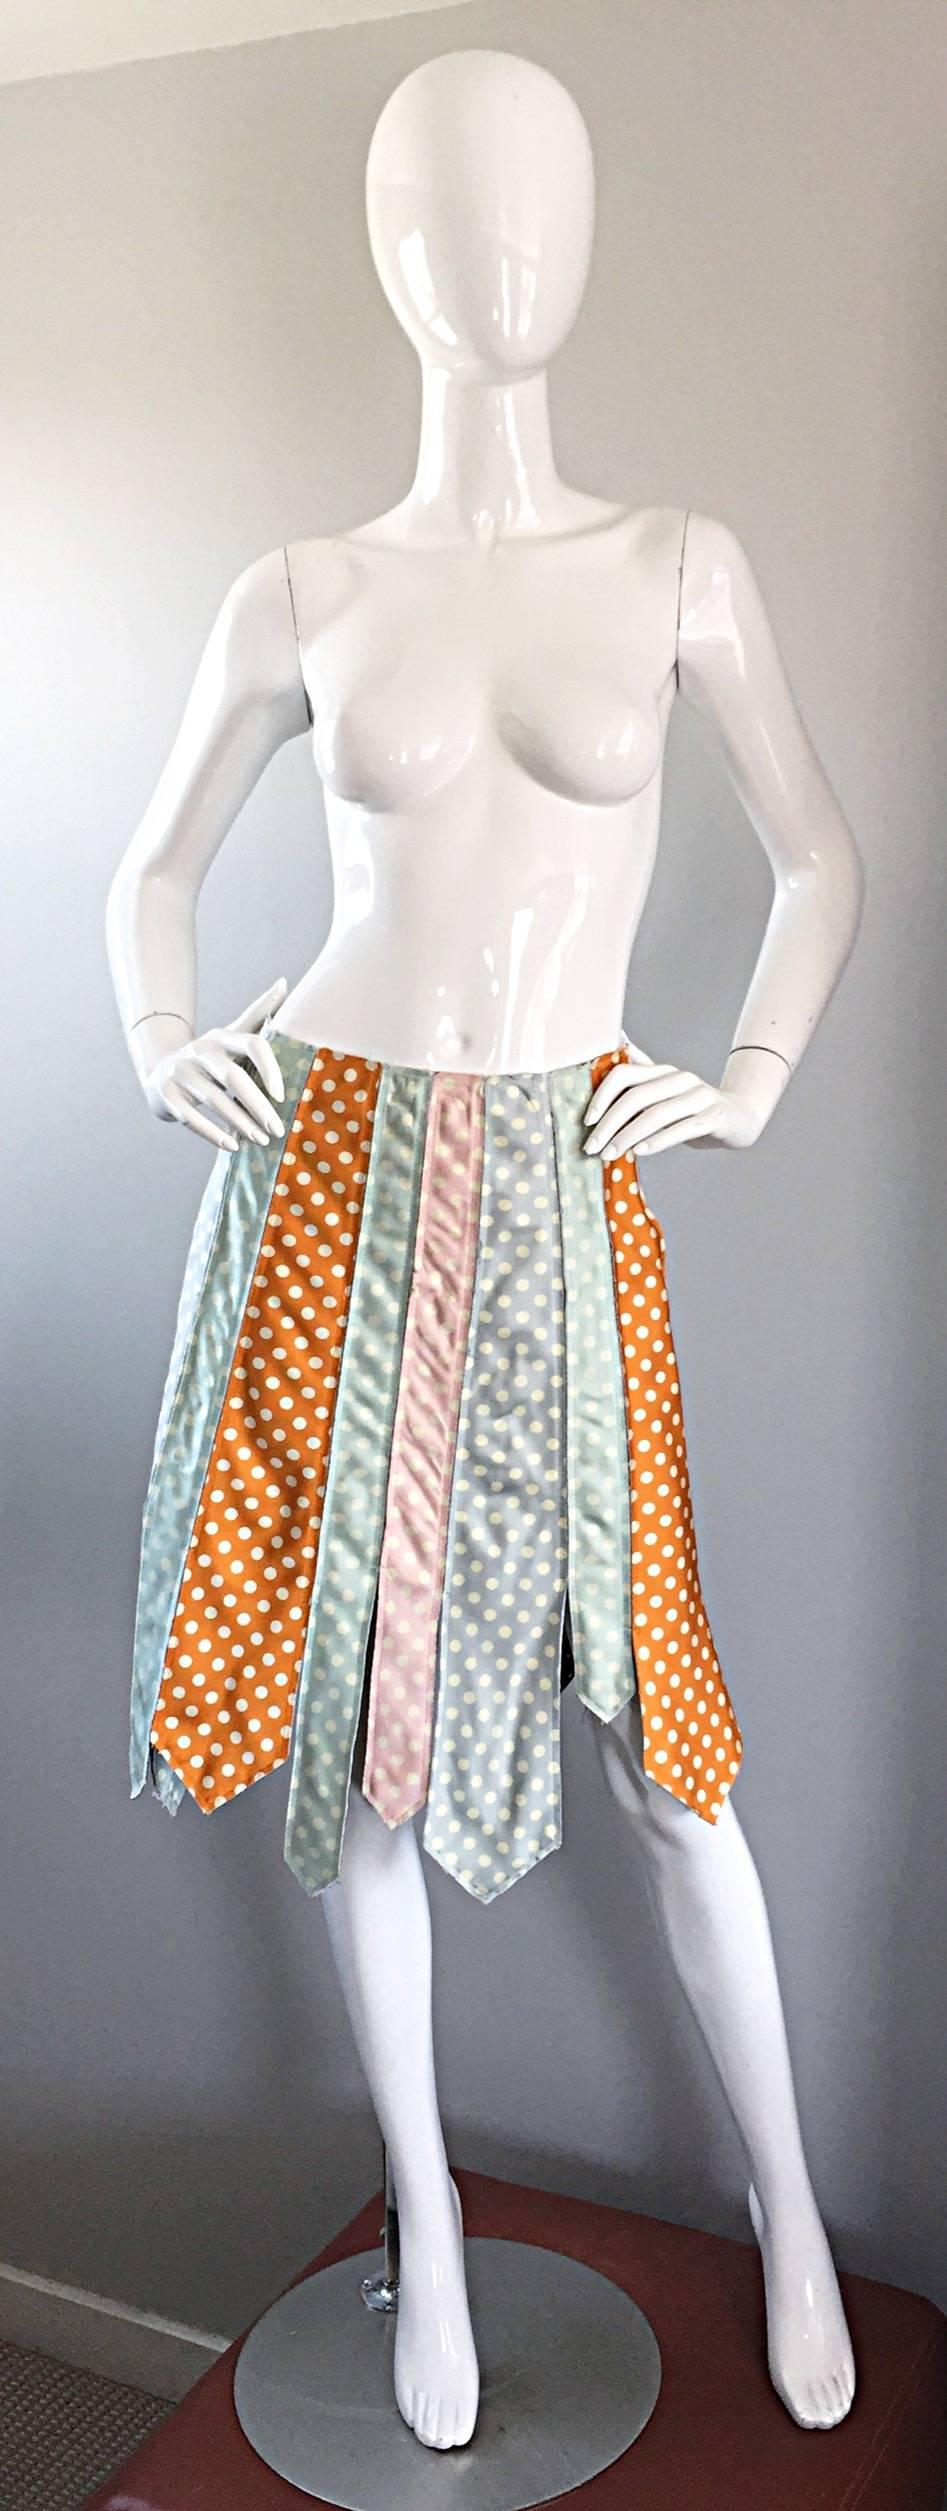 Super rare vintage PAUL SMITH skirt from his first women's collection in 1993! This collectible skirt is all silk and features panels of polka dot printed silk shaped men's ties. Light blue, pink and burnt orange colors. Metal zipper up the side